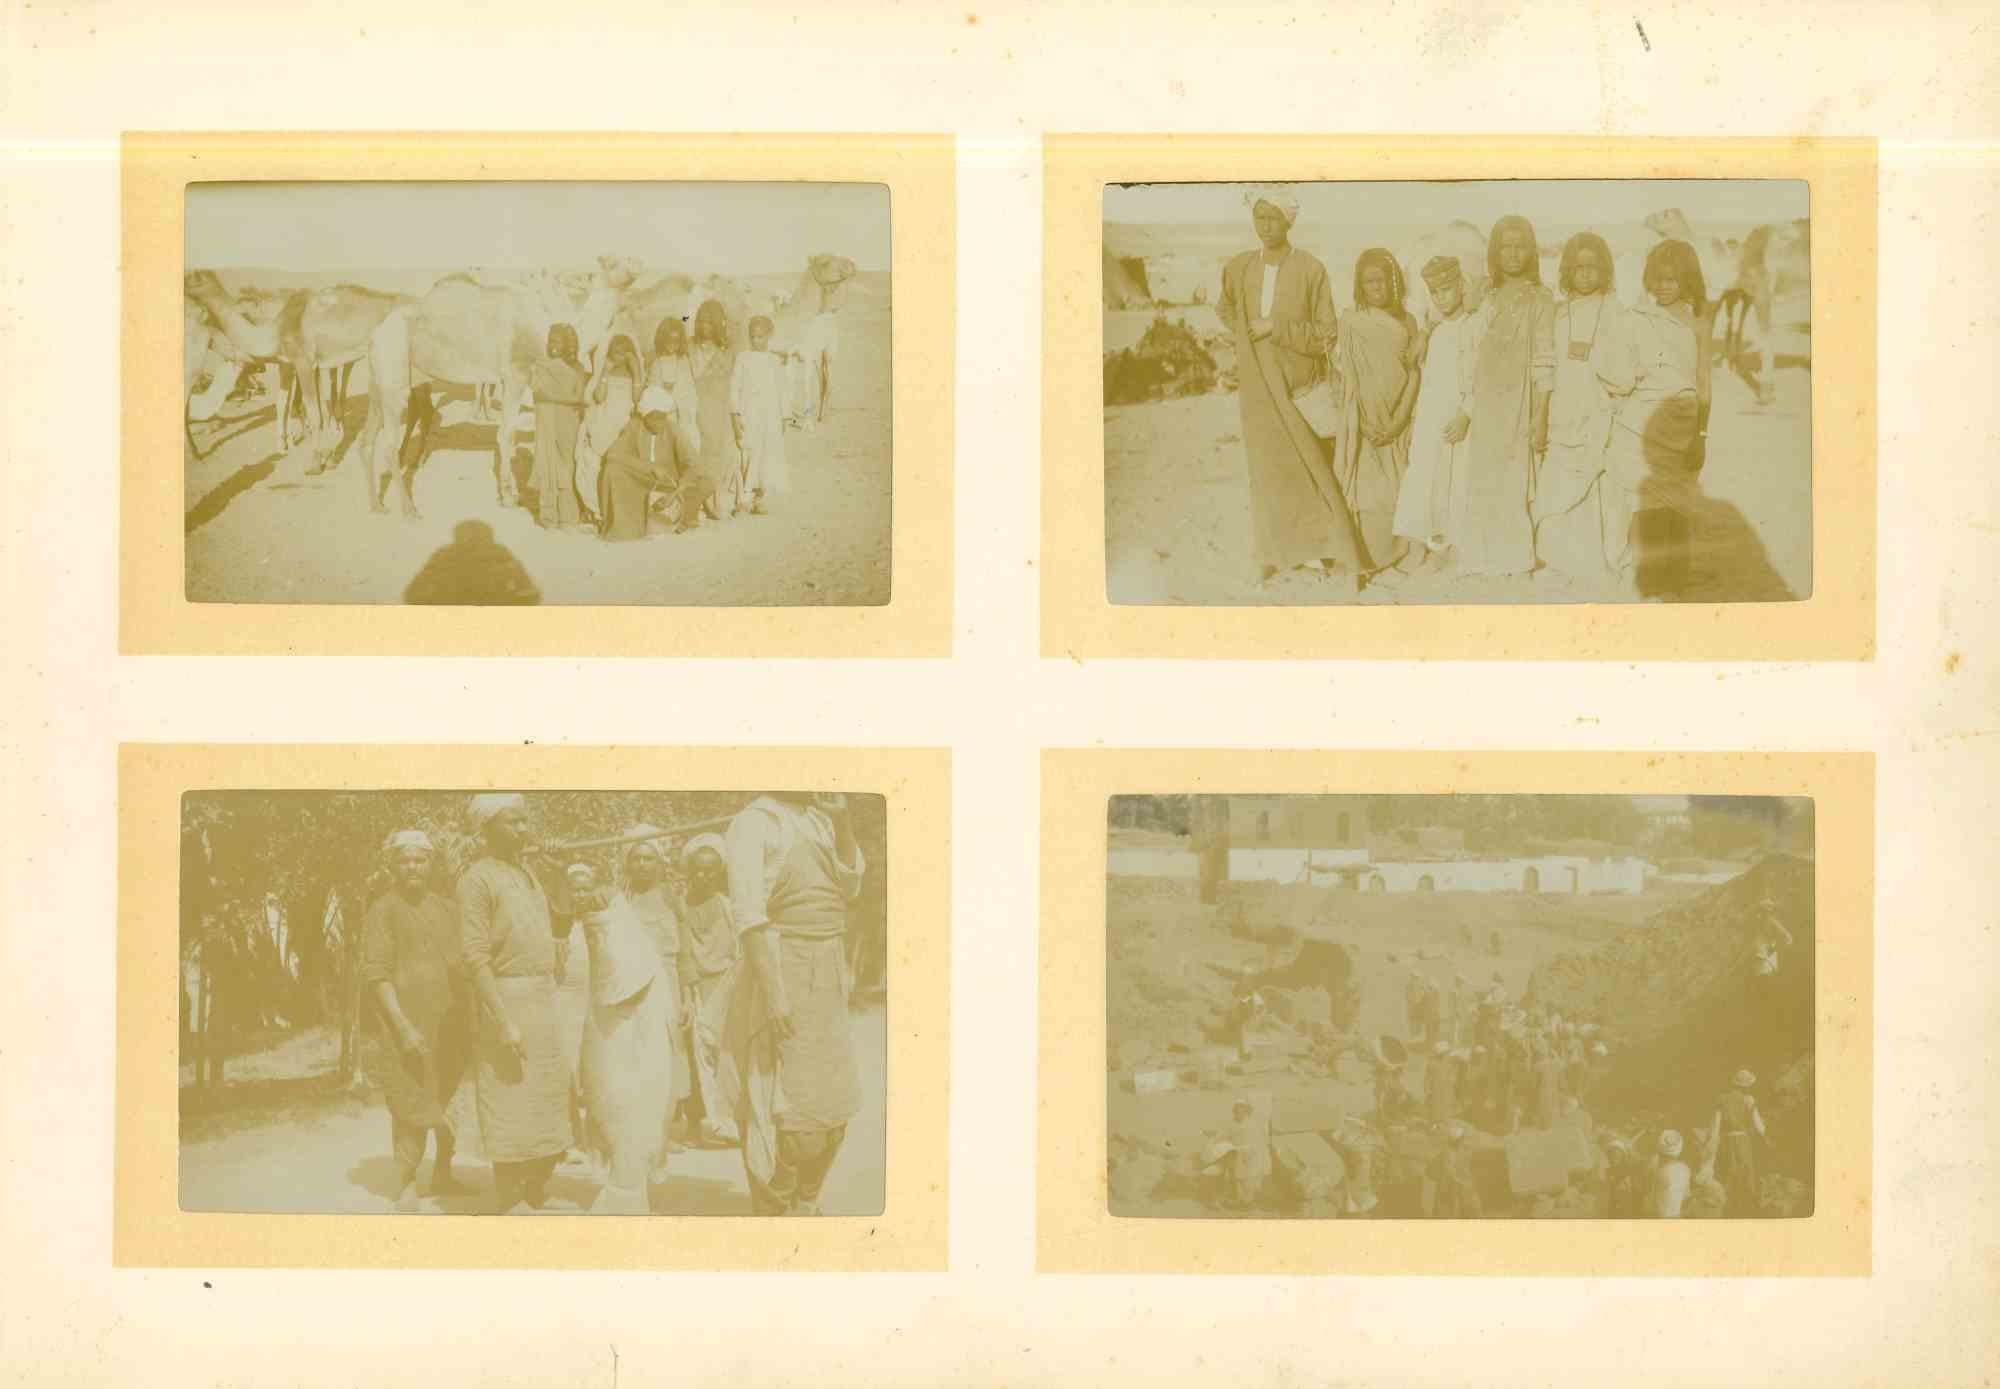 Views of Egypt - Vintage Photograph - Early 20th Century - White Figurative Photograph by Unknown